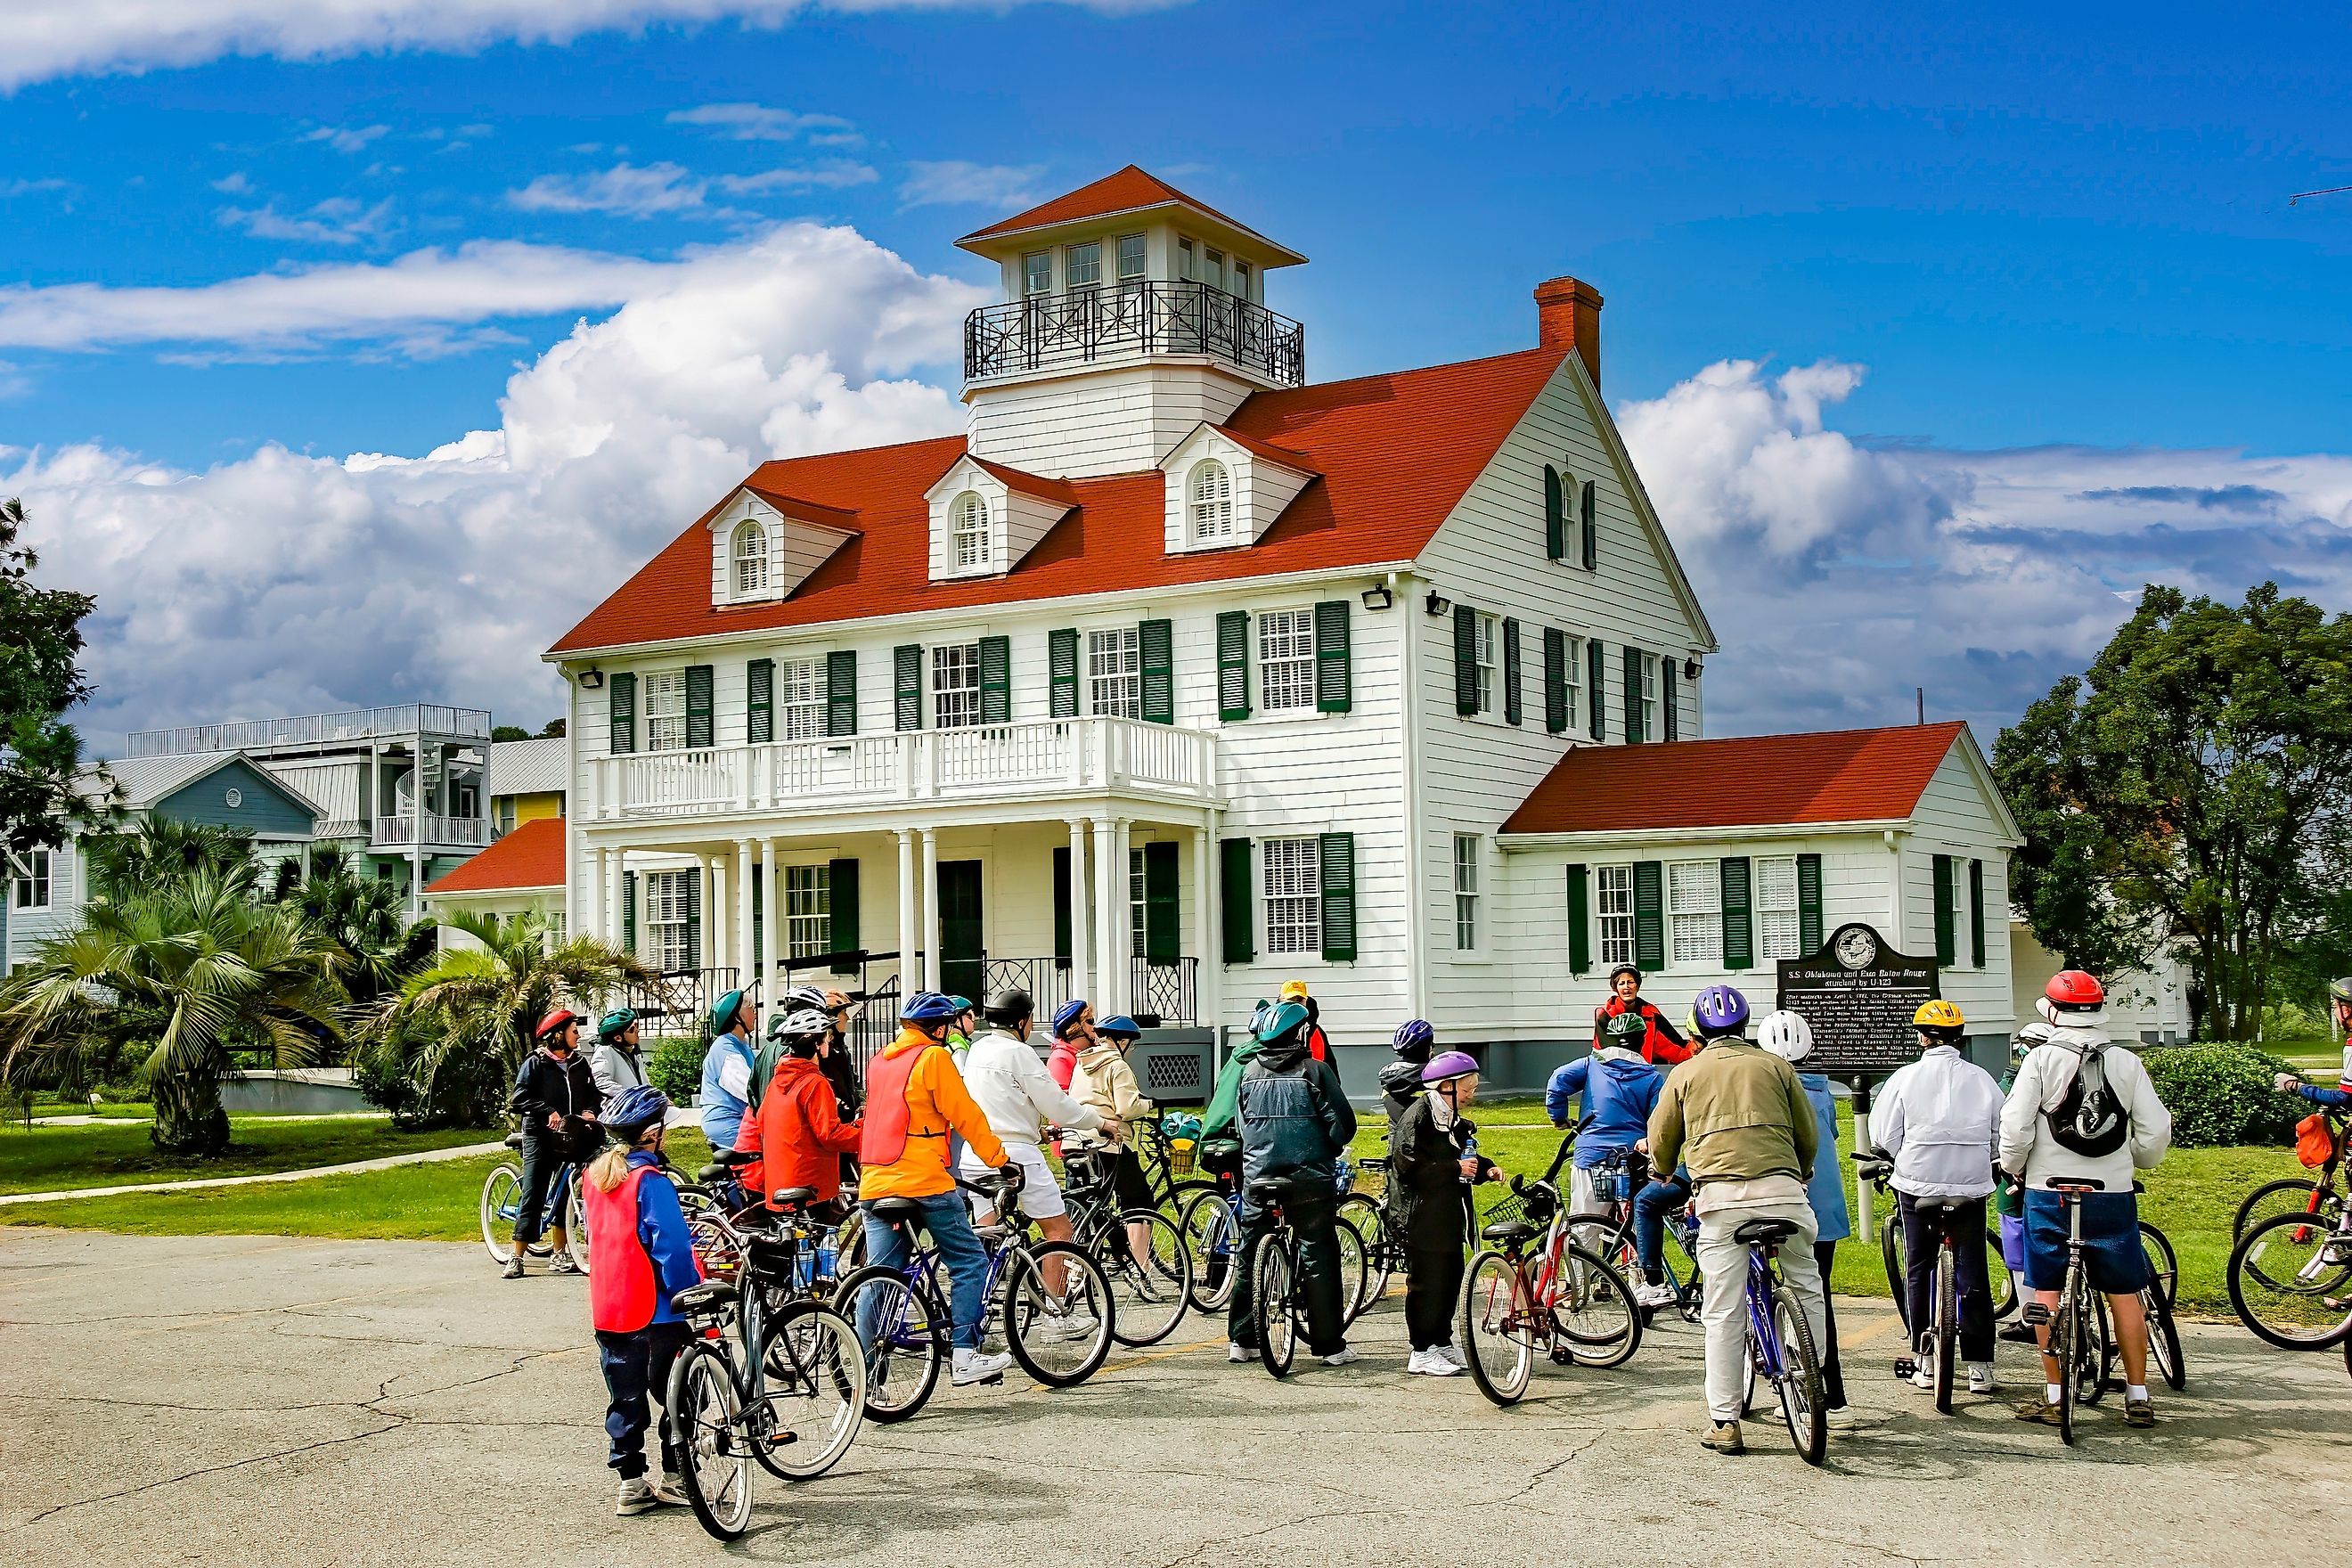 St. Simons Island, Georgia: Leader of a bicycle tour group giving instruction in front of the St. Simons Island Light, a lighthouse located on the southern tip of the island. Editorial credit: Bob Pool / Shutterstock.com